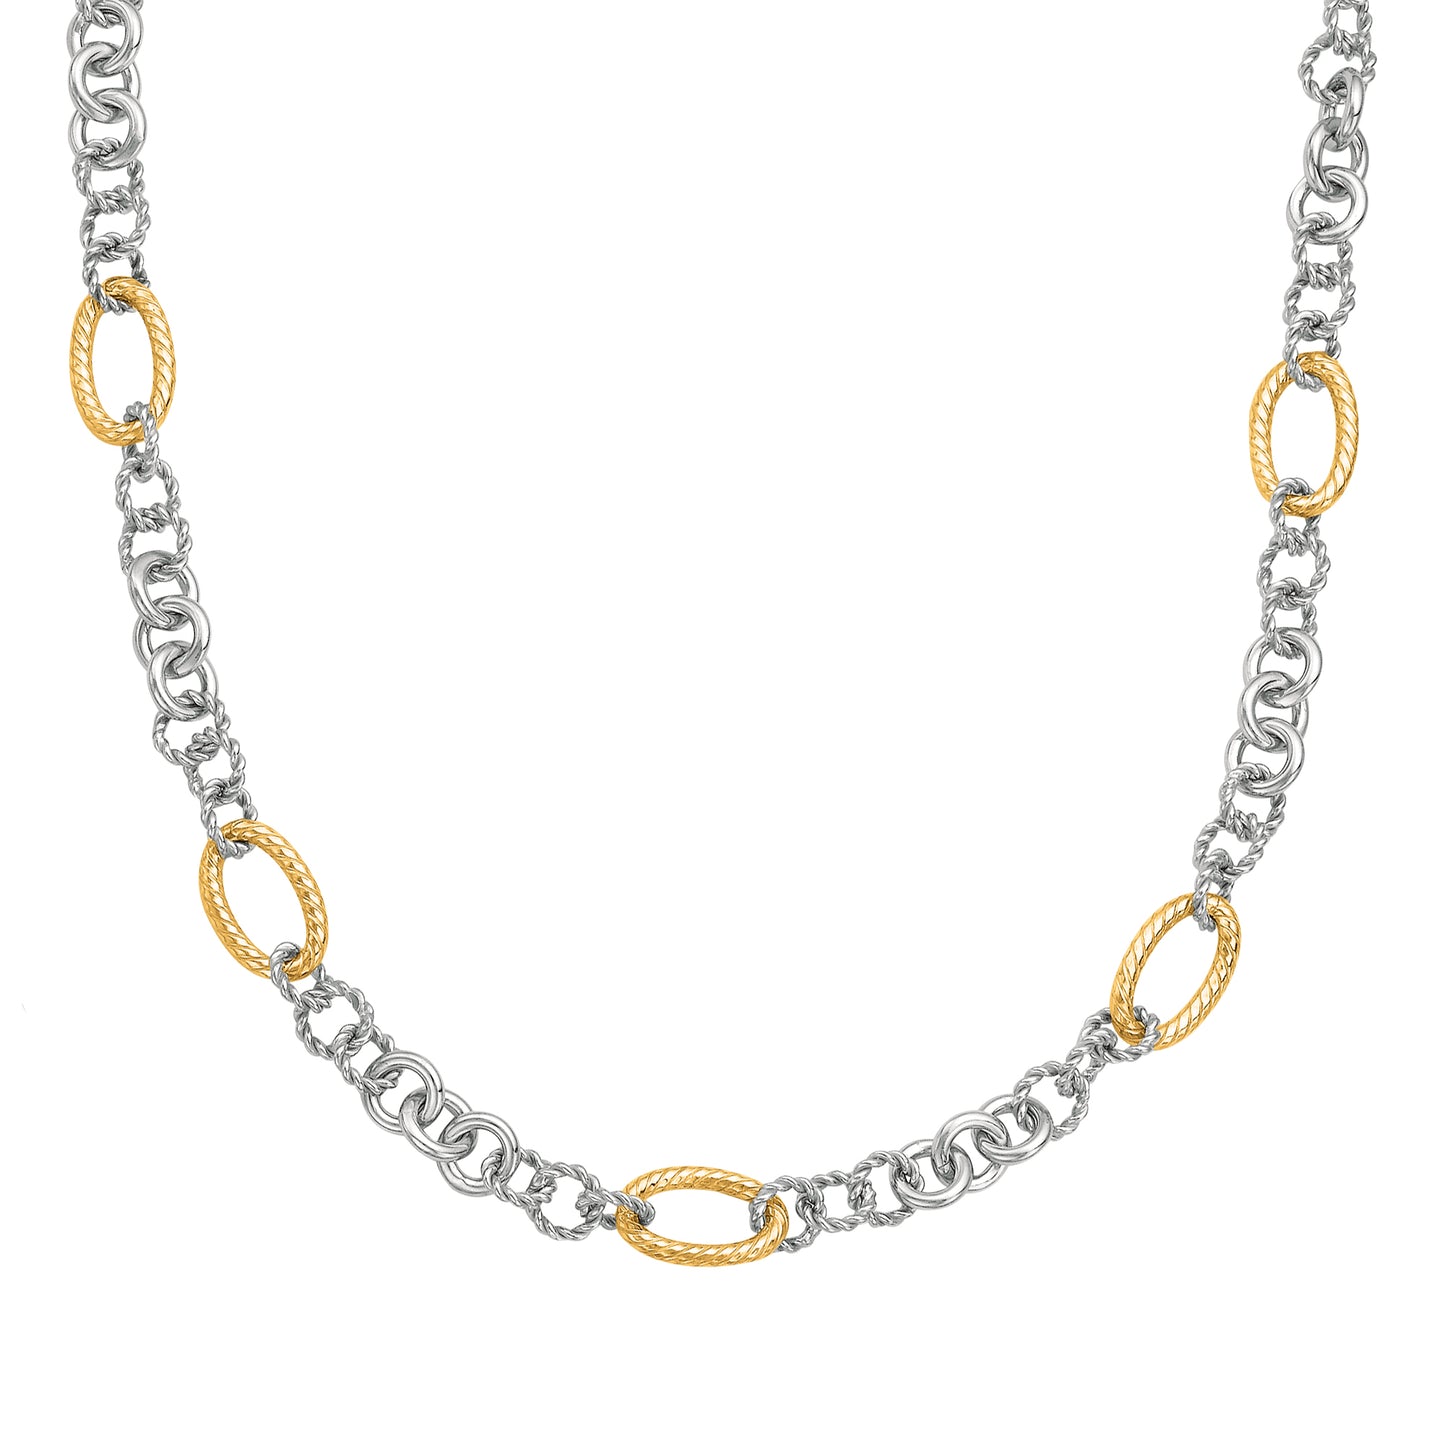 Silver & 18K Italian Cable Necklace